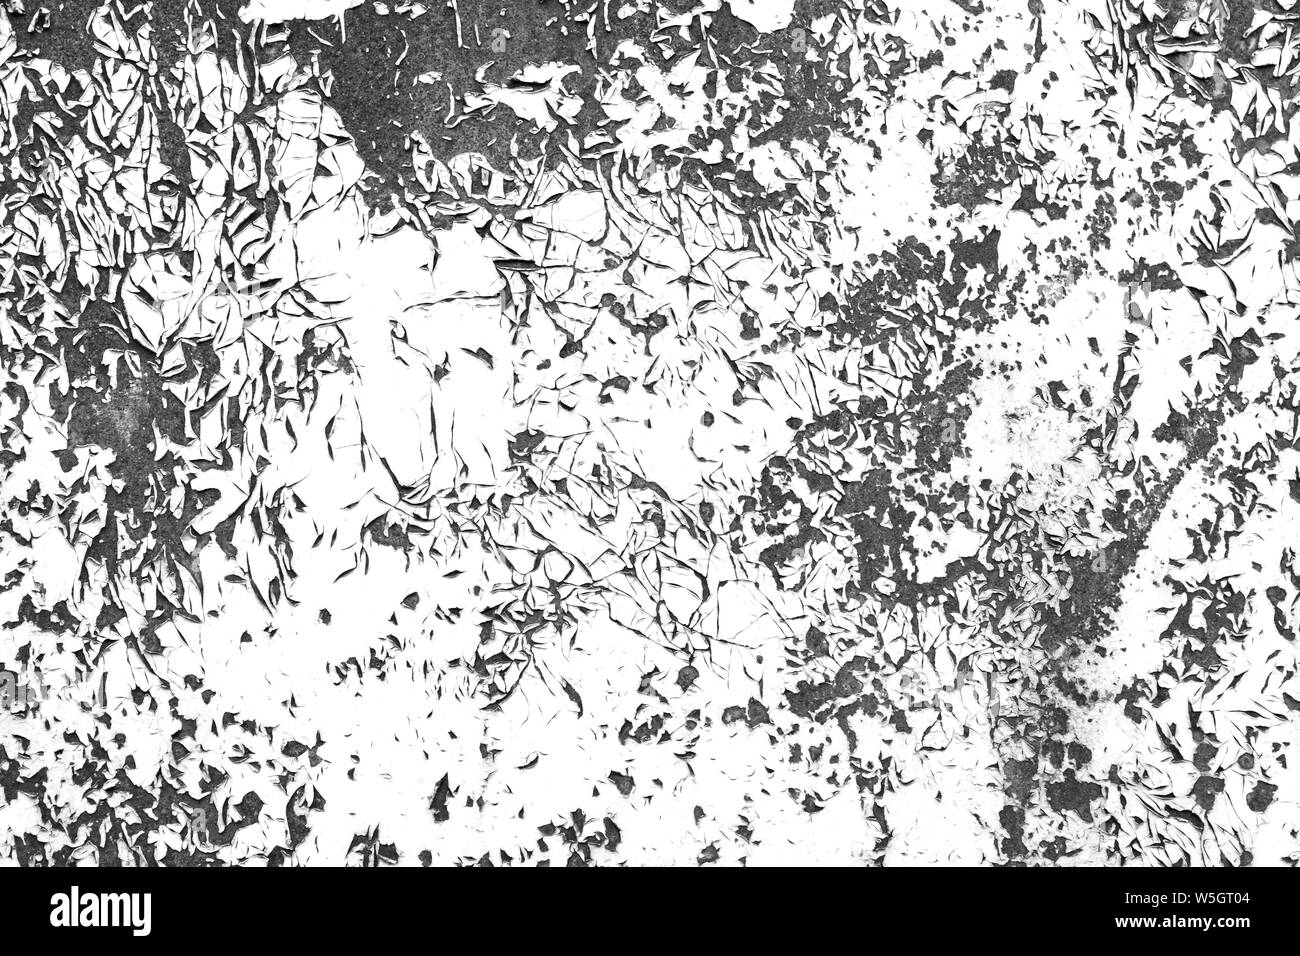 Distressed cracked paint contrast black and white grunge texture template for overlay artwork. Stock Photo